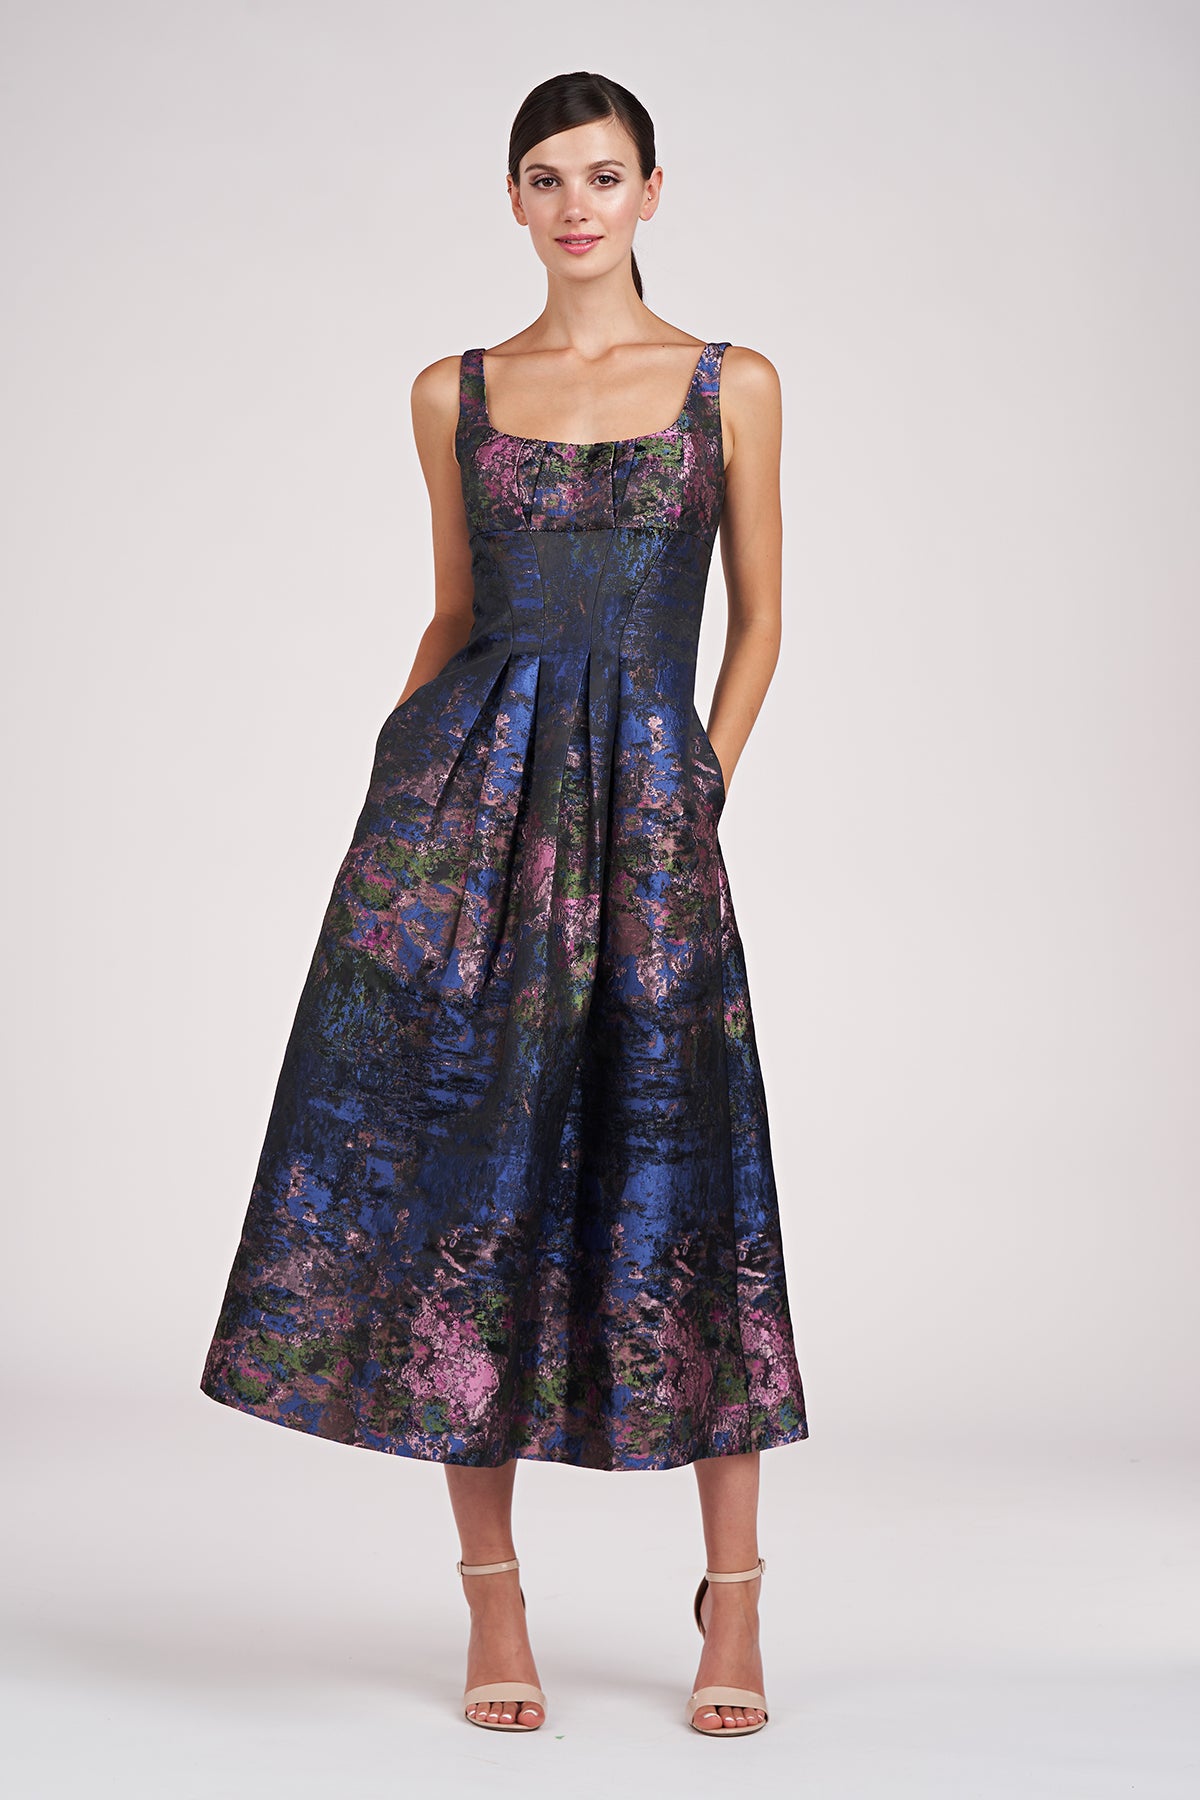 KAY UNGER Waverly Tea Length Dress In Turkish Blue Floral Pattern Size 6  NWT